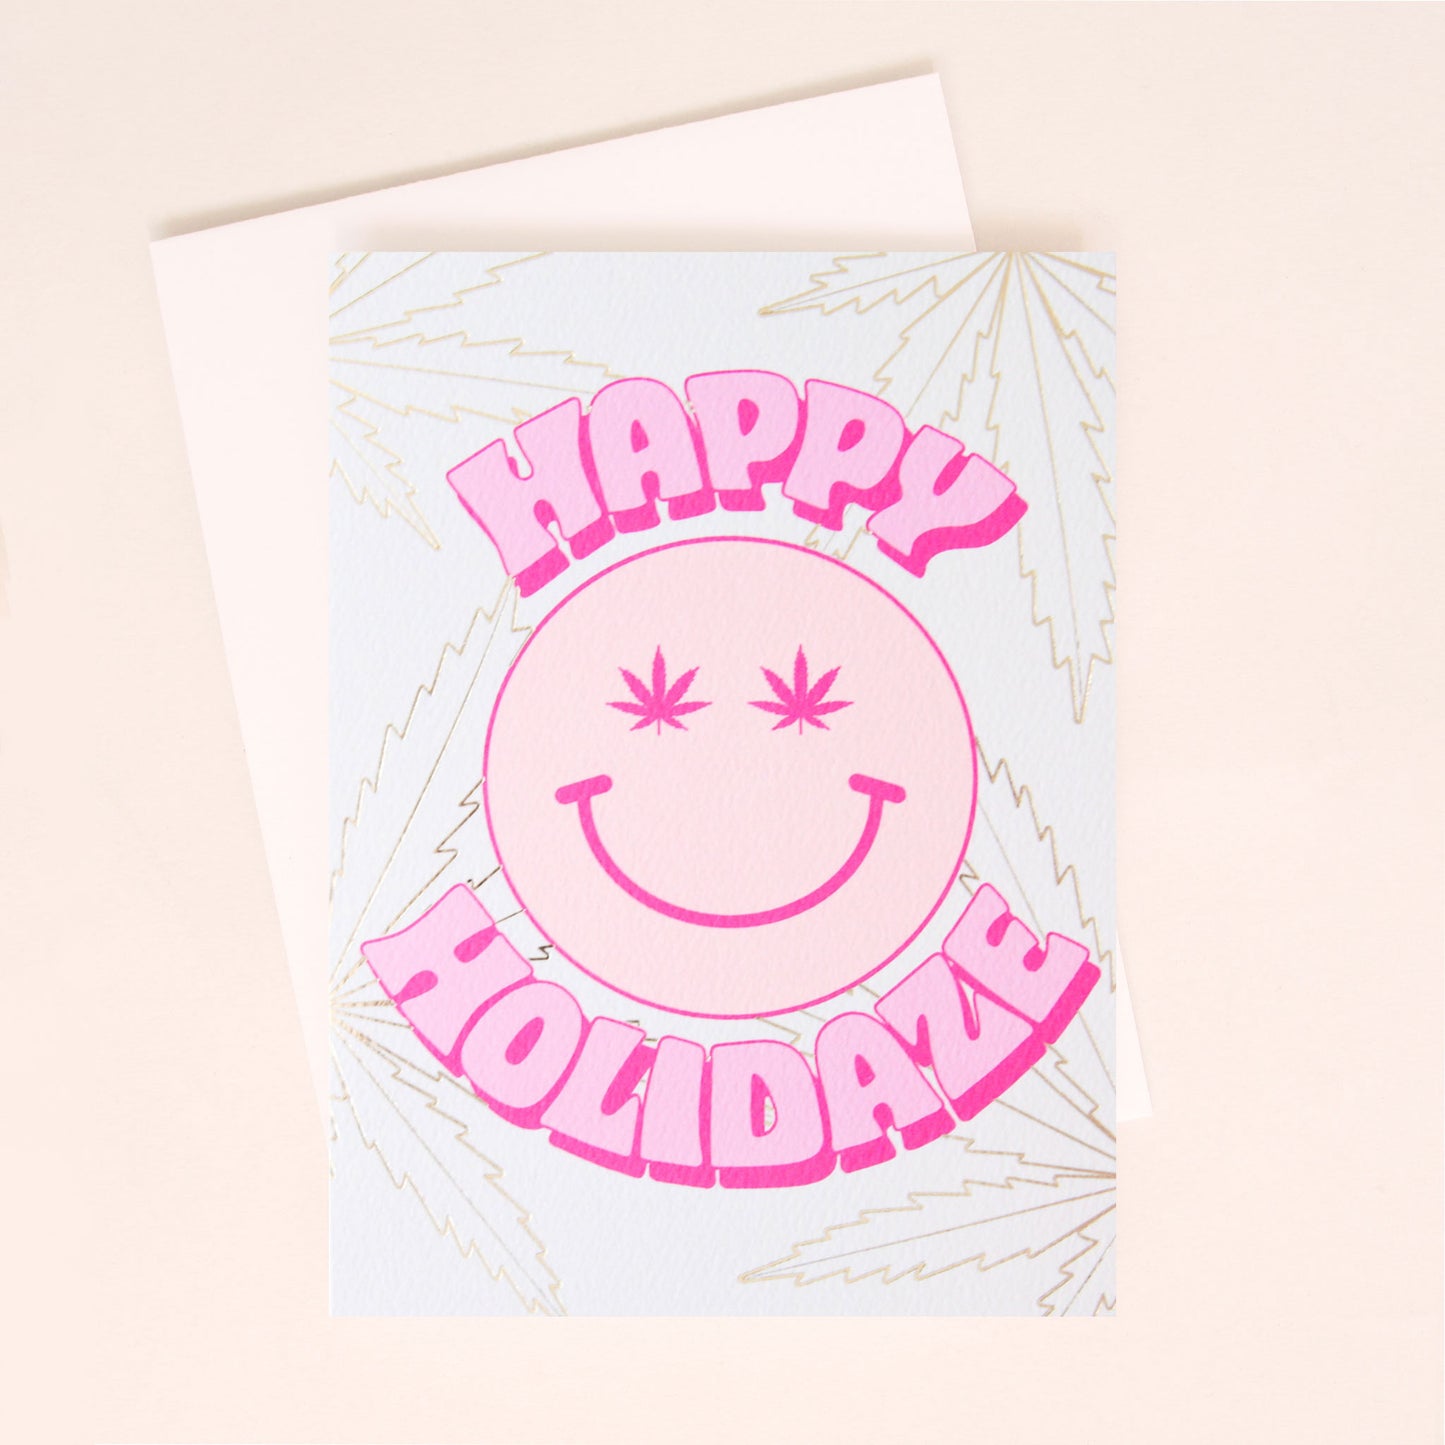 Pale card with gold foil weed leaves in the background. In the center of the card is a pale pink smiley face with magenta weed leaves for eyes. The text 'Happy Holidaze' curves around the smiley face. The card is accompanied by a white envelope.